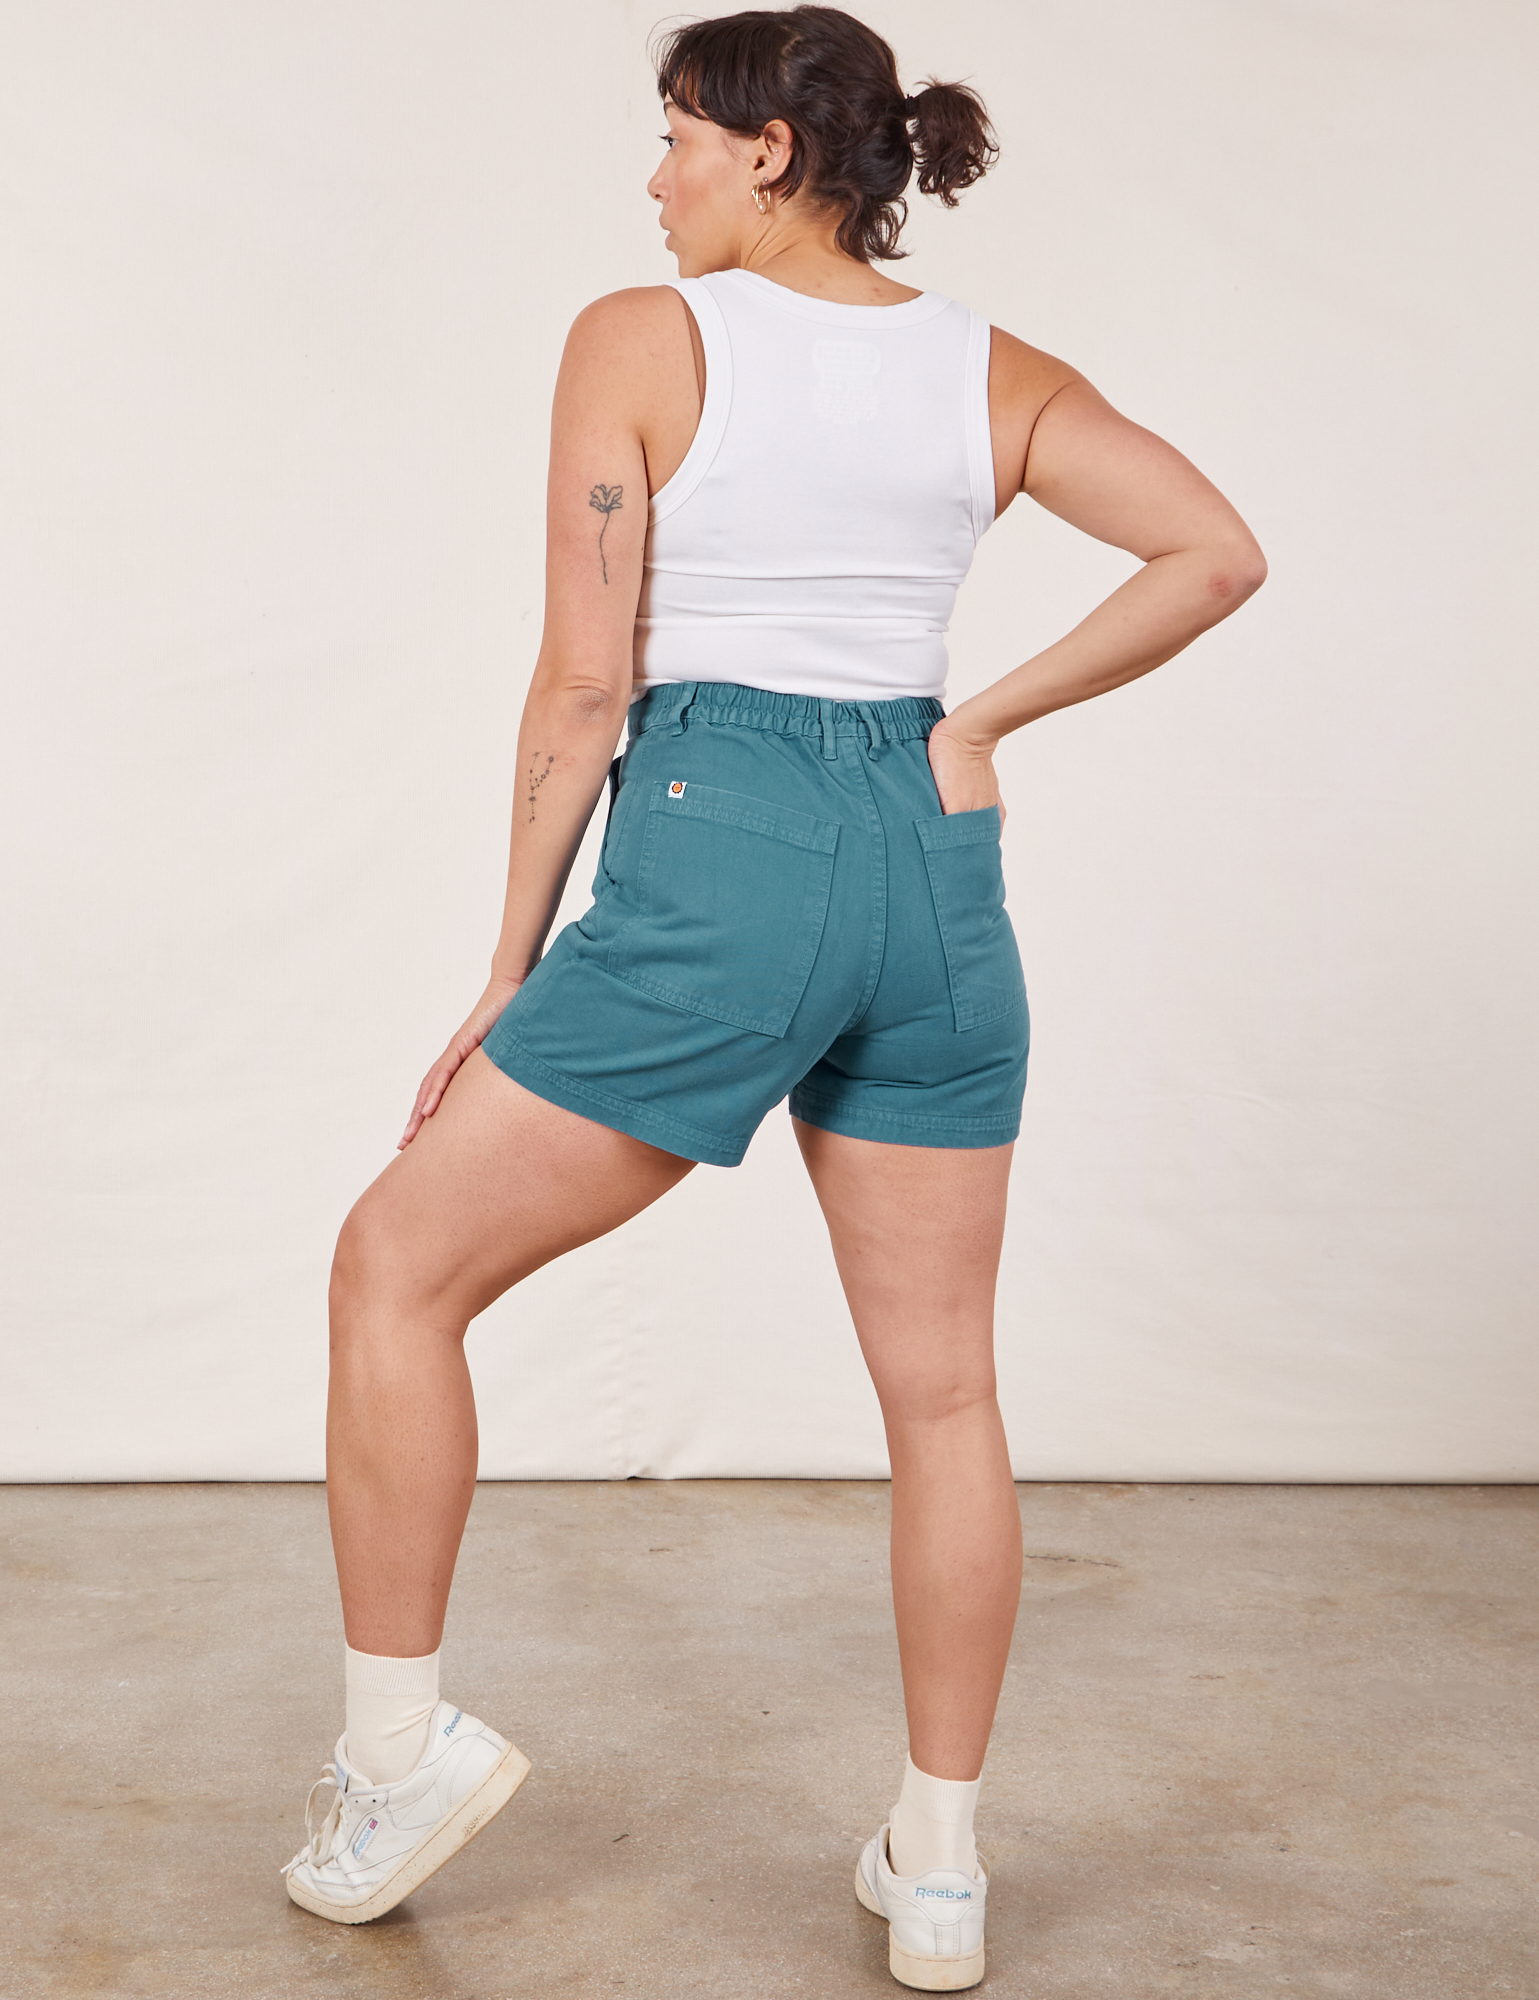 Back view of Classic Work Shorts in Marine Blue and Cropped Tank Top in vintage tee off-white on Tiara